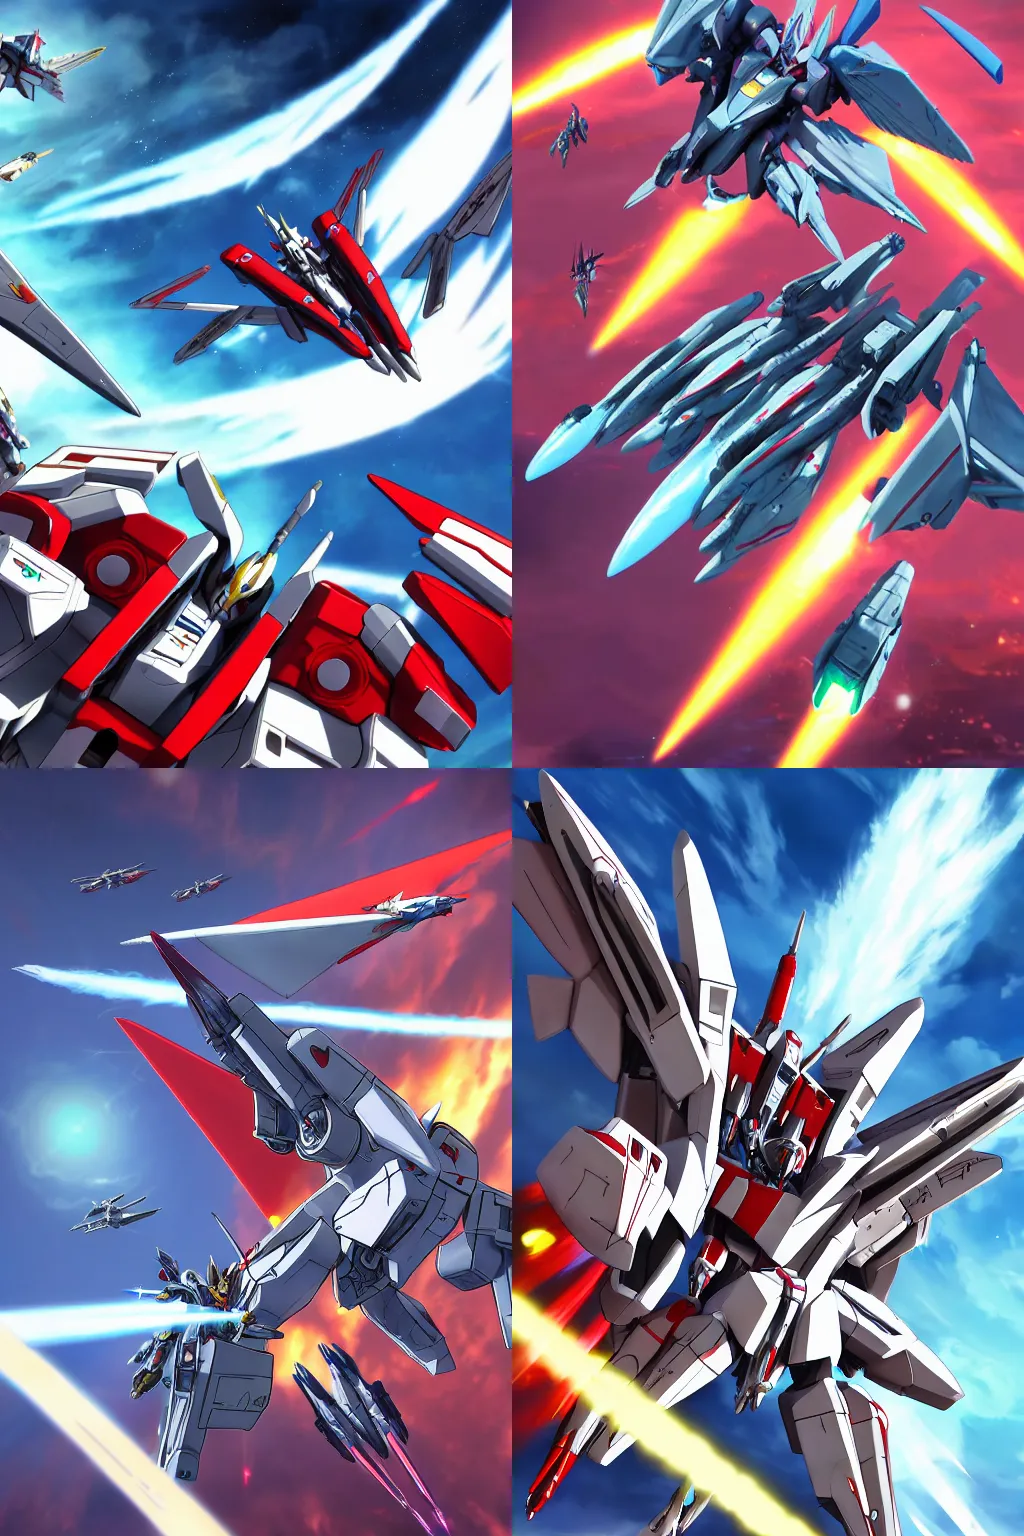 Prompt: a one on one fight in the sky between Starscream and Jetfire from Transformers, Transformers Armada, Transformers Generation One, Macross Frontier, Battroid Mode, Anime, Robots, Robot, Robot Mode, 8k, ultra realistic, illustration, splash art, Guilty Gear Strive Splash Art, League of Legends Splash Art, Macross Delta, Sunny day with clear sky, action scene, fight scene, robot mode, rule of thirds, good value control, John Singer Sargent, William-Adolphe Bouguereau,